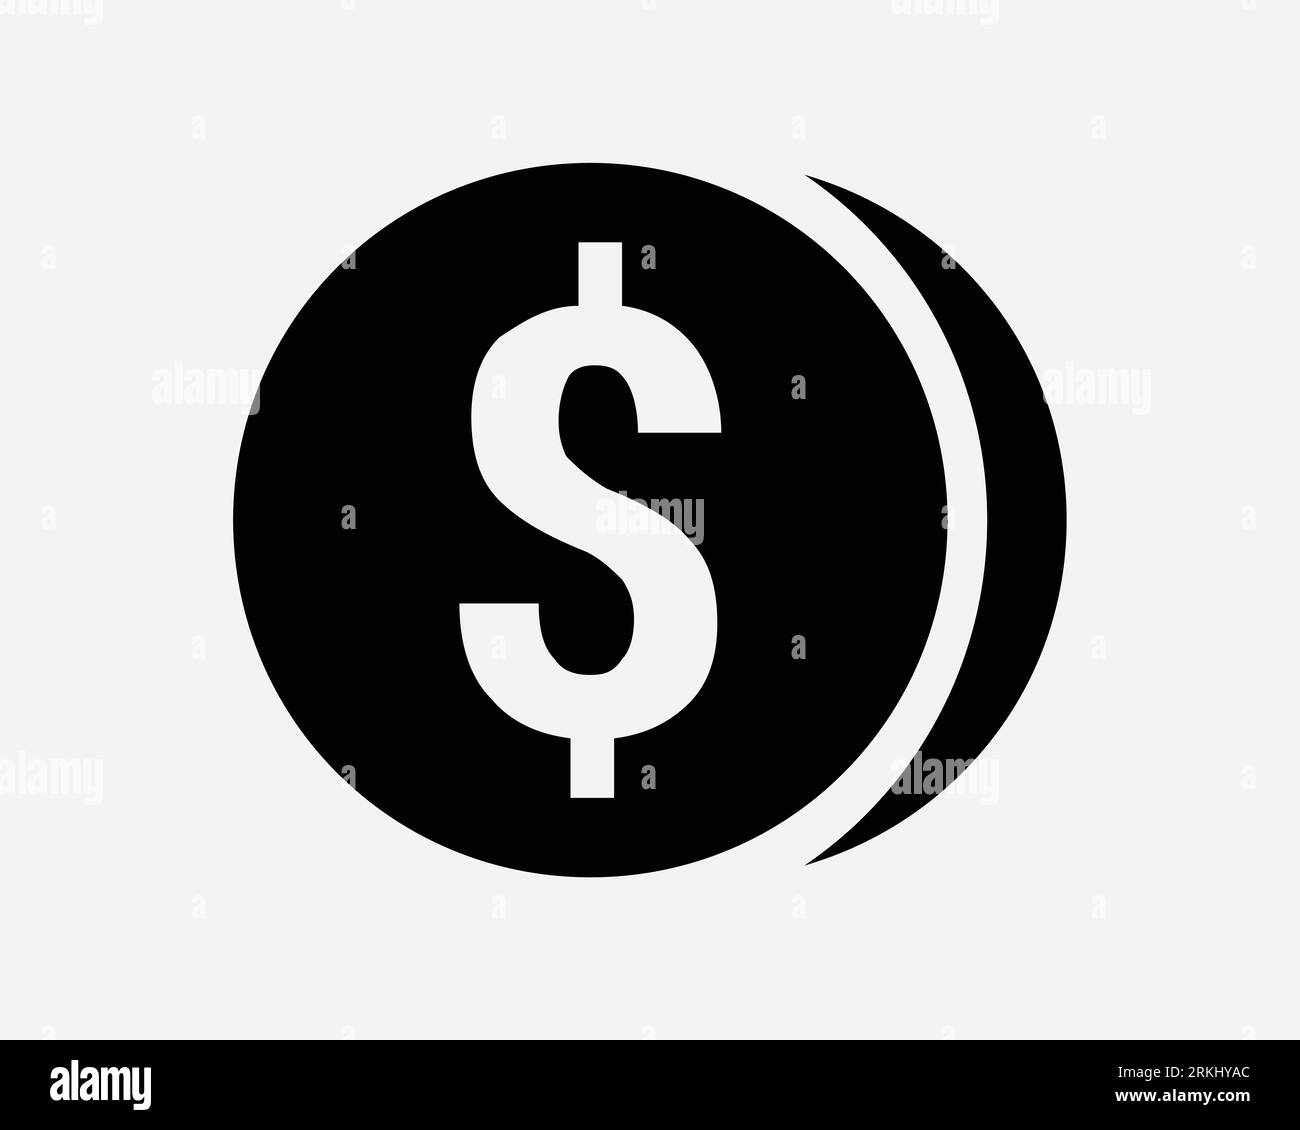 Money Coins Icon Coin Stack Currency Cash Finance Bank Banking Investment Payment Wealth Black White Outline Shape Vector Clipart Graphic Sign Symbol Stock Vector